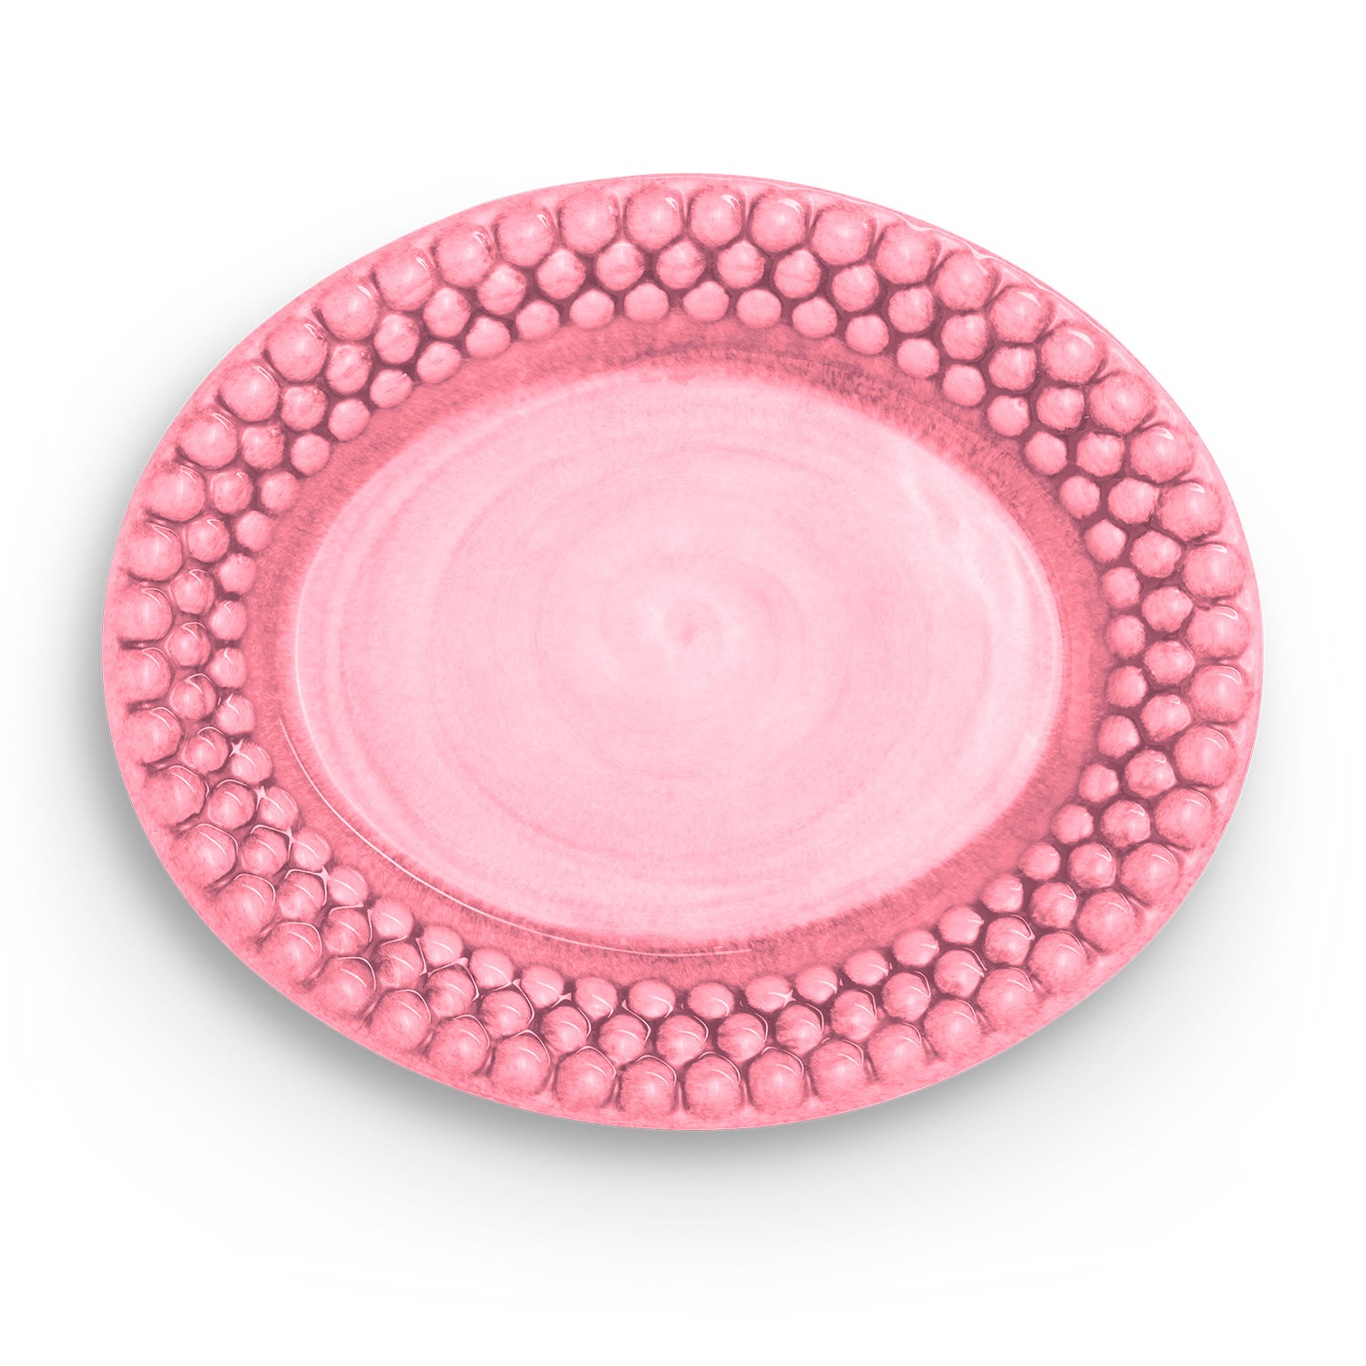 Bubbles Oval Plate 20 cm, Pink